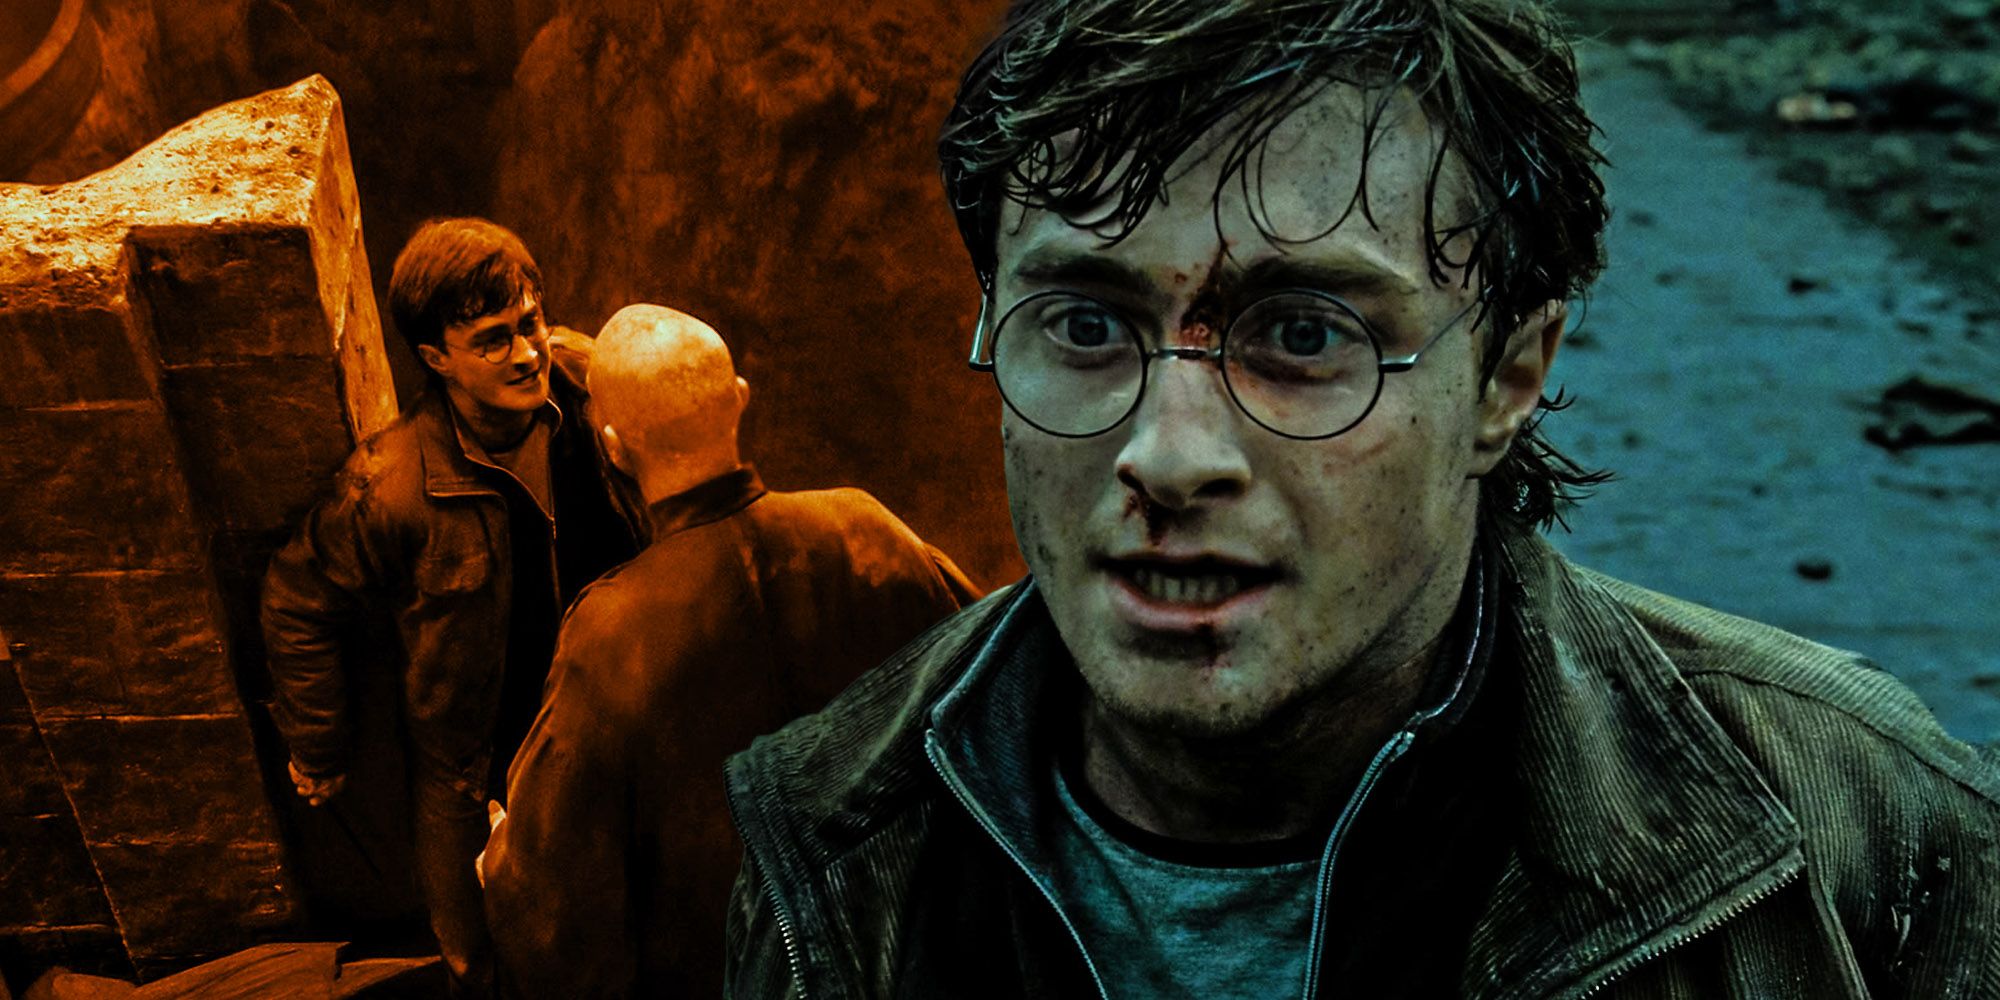 A composite image showing Harry Potter's face in the forefront and Harry and Voldemort facing off in the background from Harry Potter. 